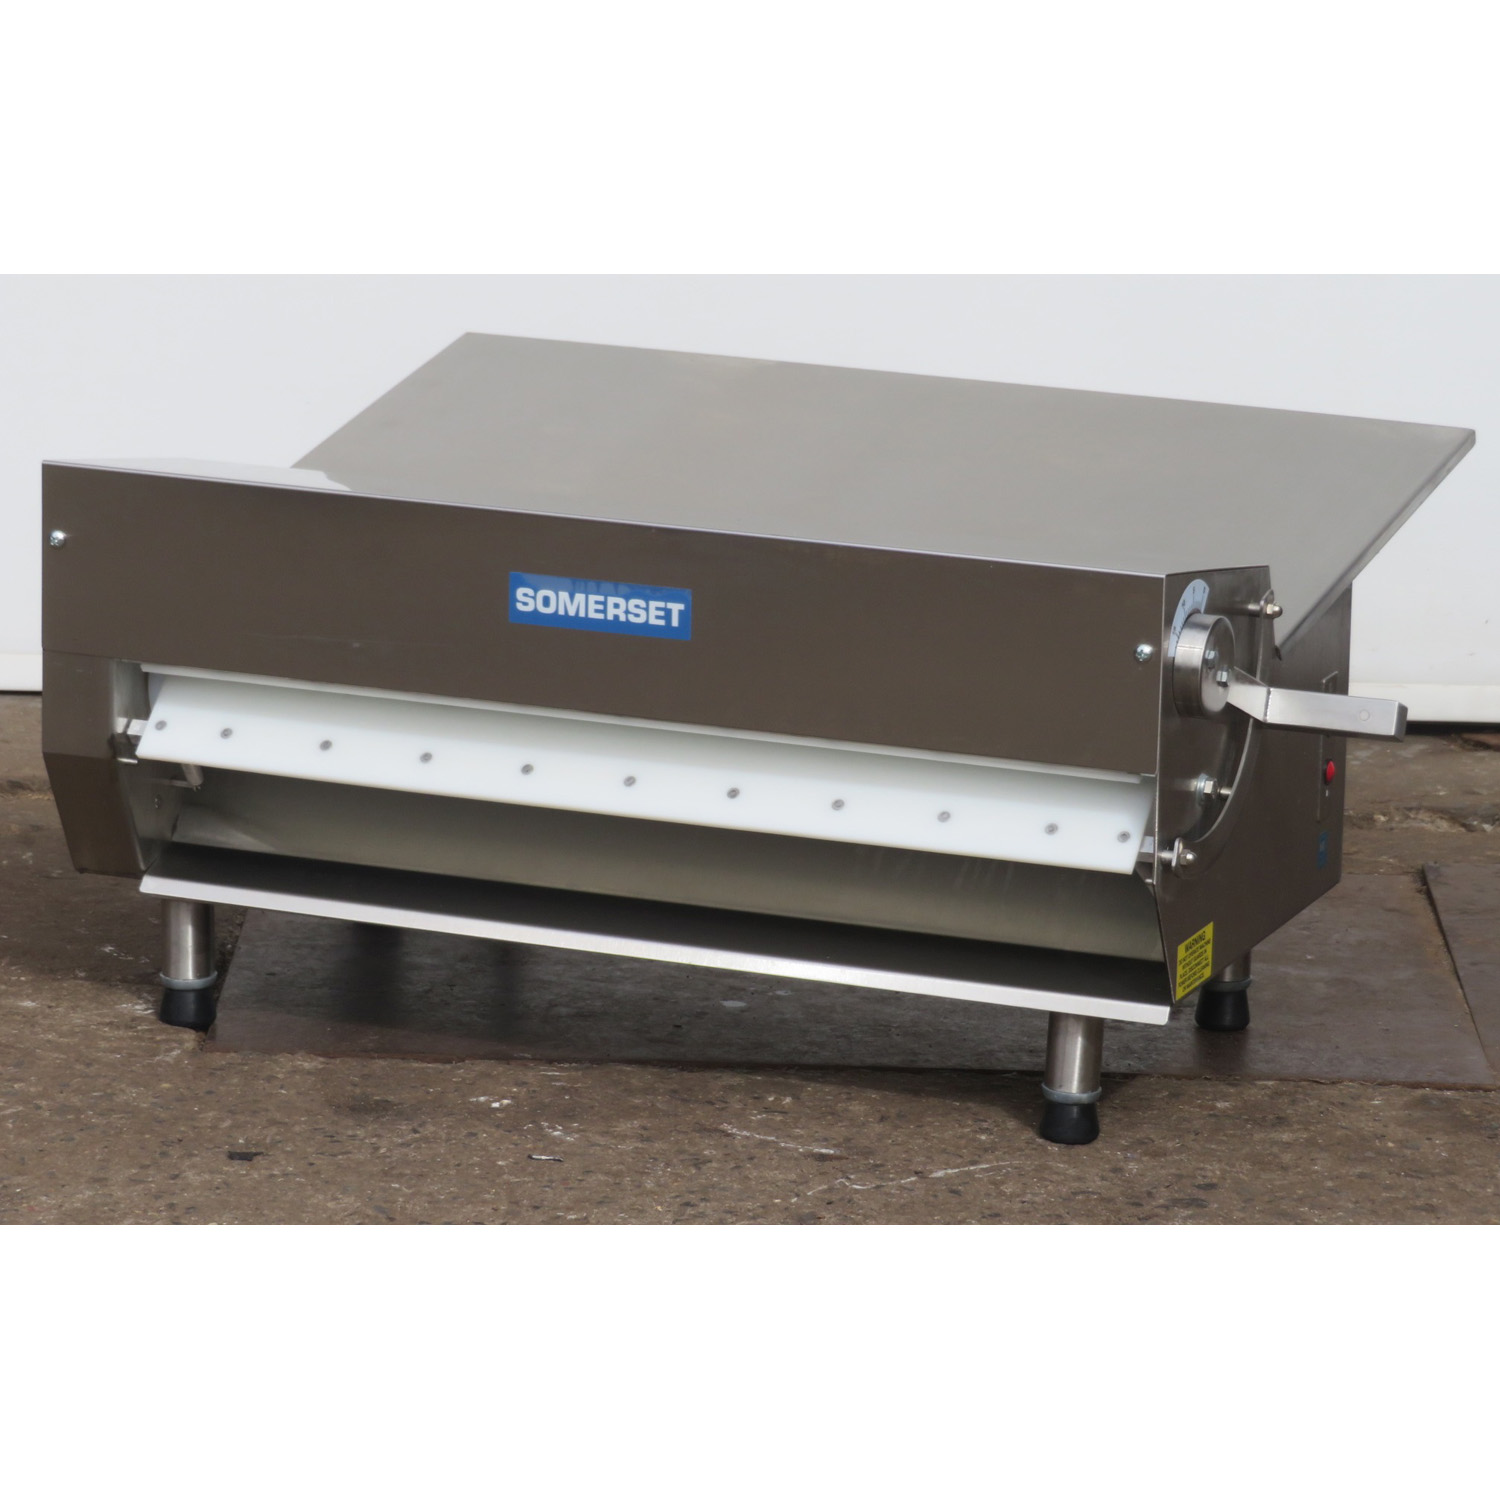 Somerset CDR-600 Dough Sheeter, Used Excellent Condition